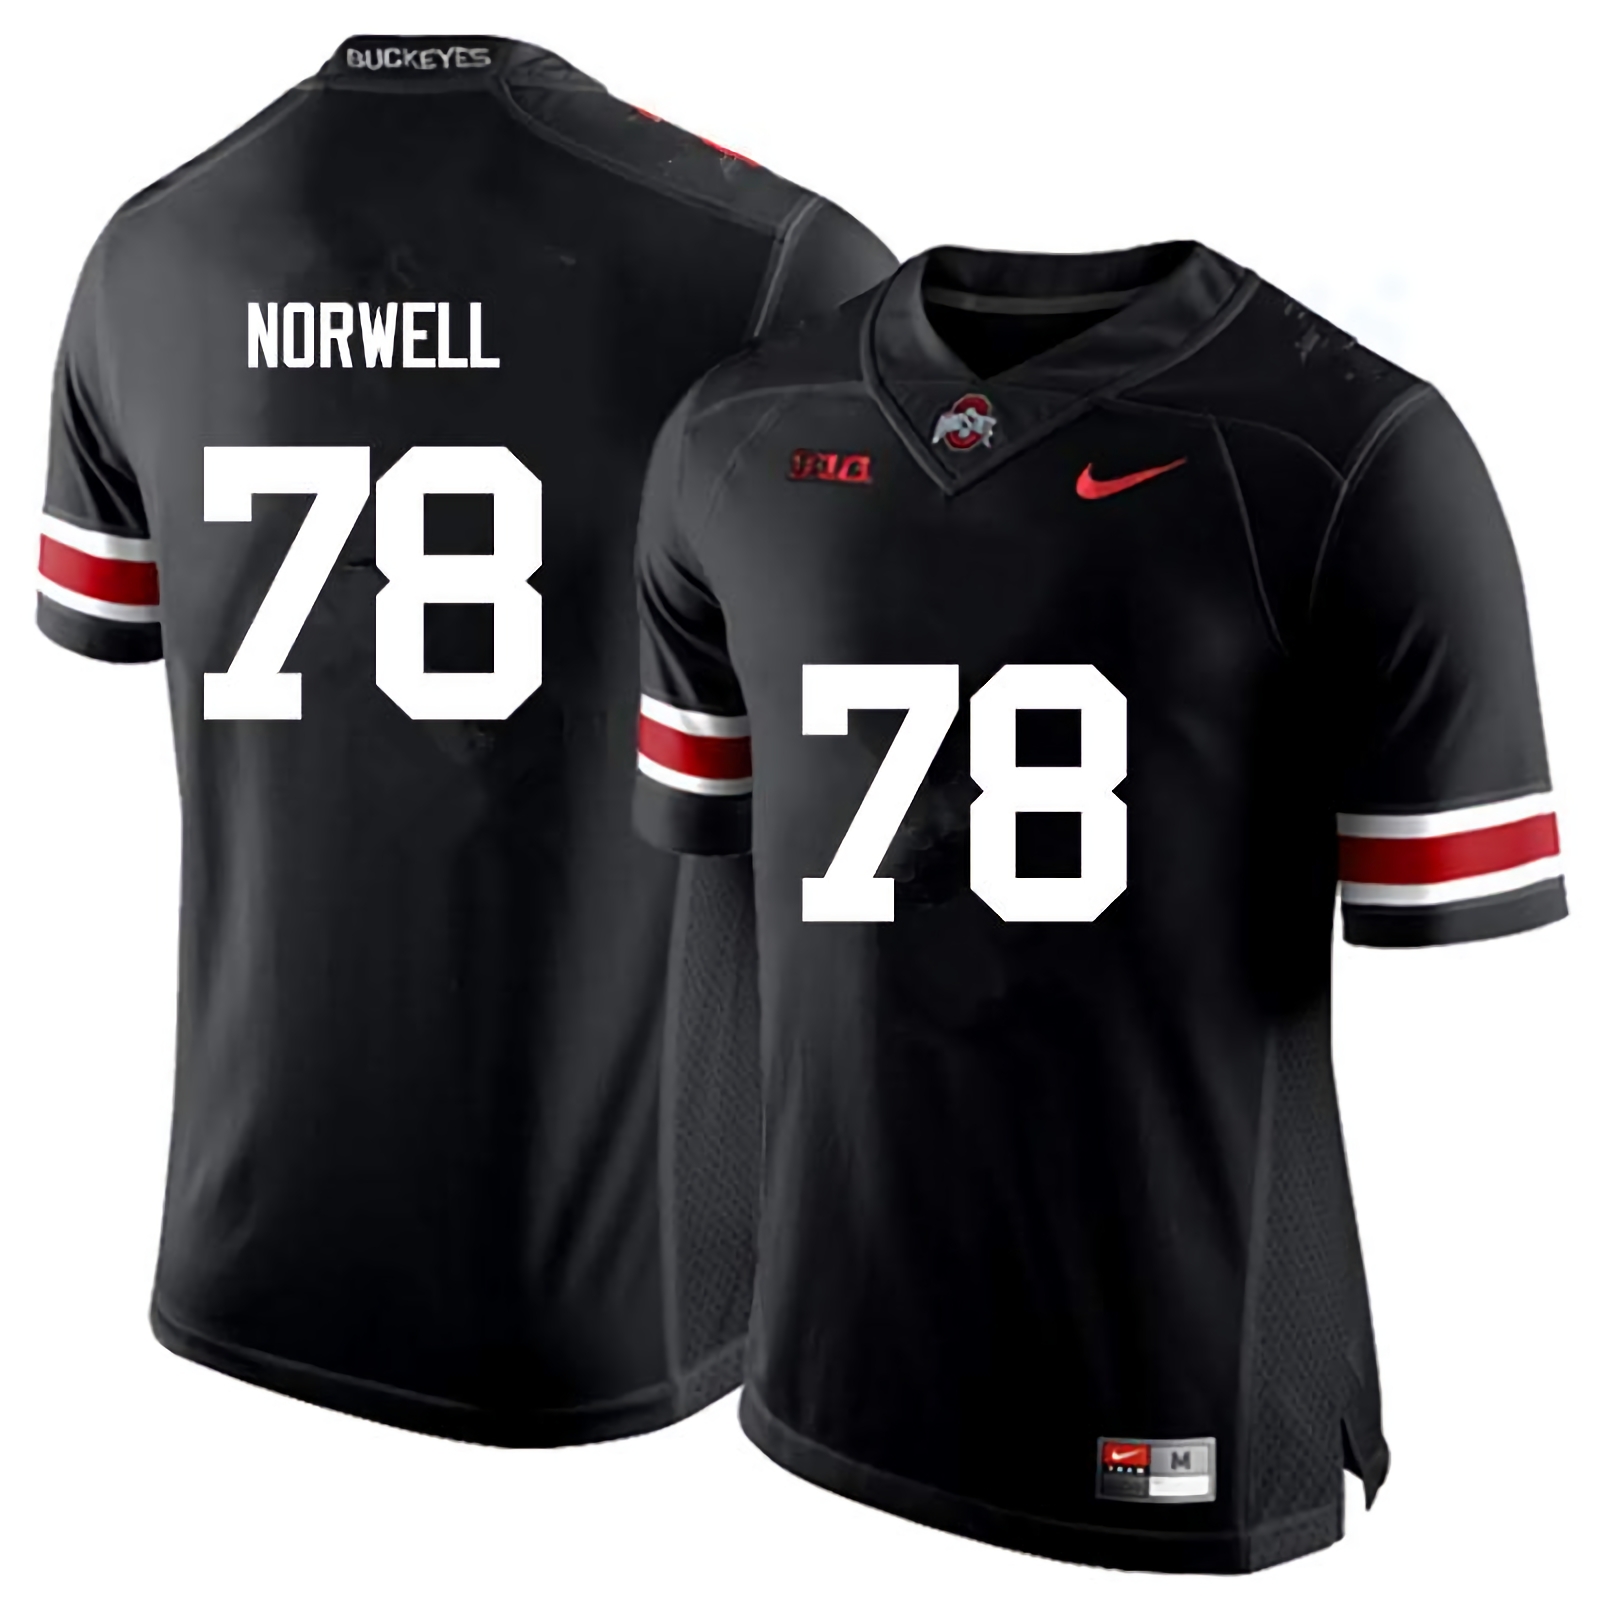 Andrew Norwell Ohio State Buckeyes Men's NCAA #78 Nike Black College Stitched Football Jersey QMJ3556NB